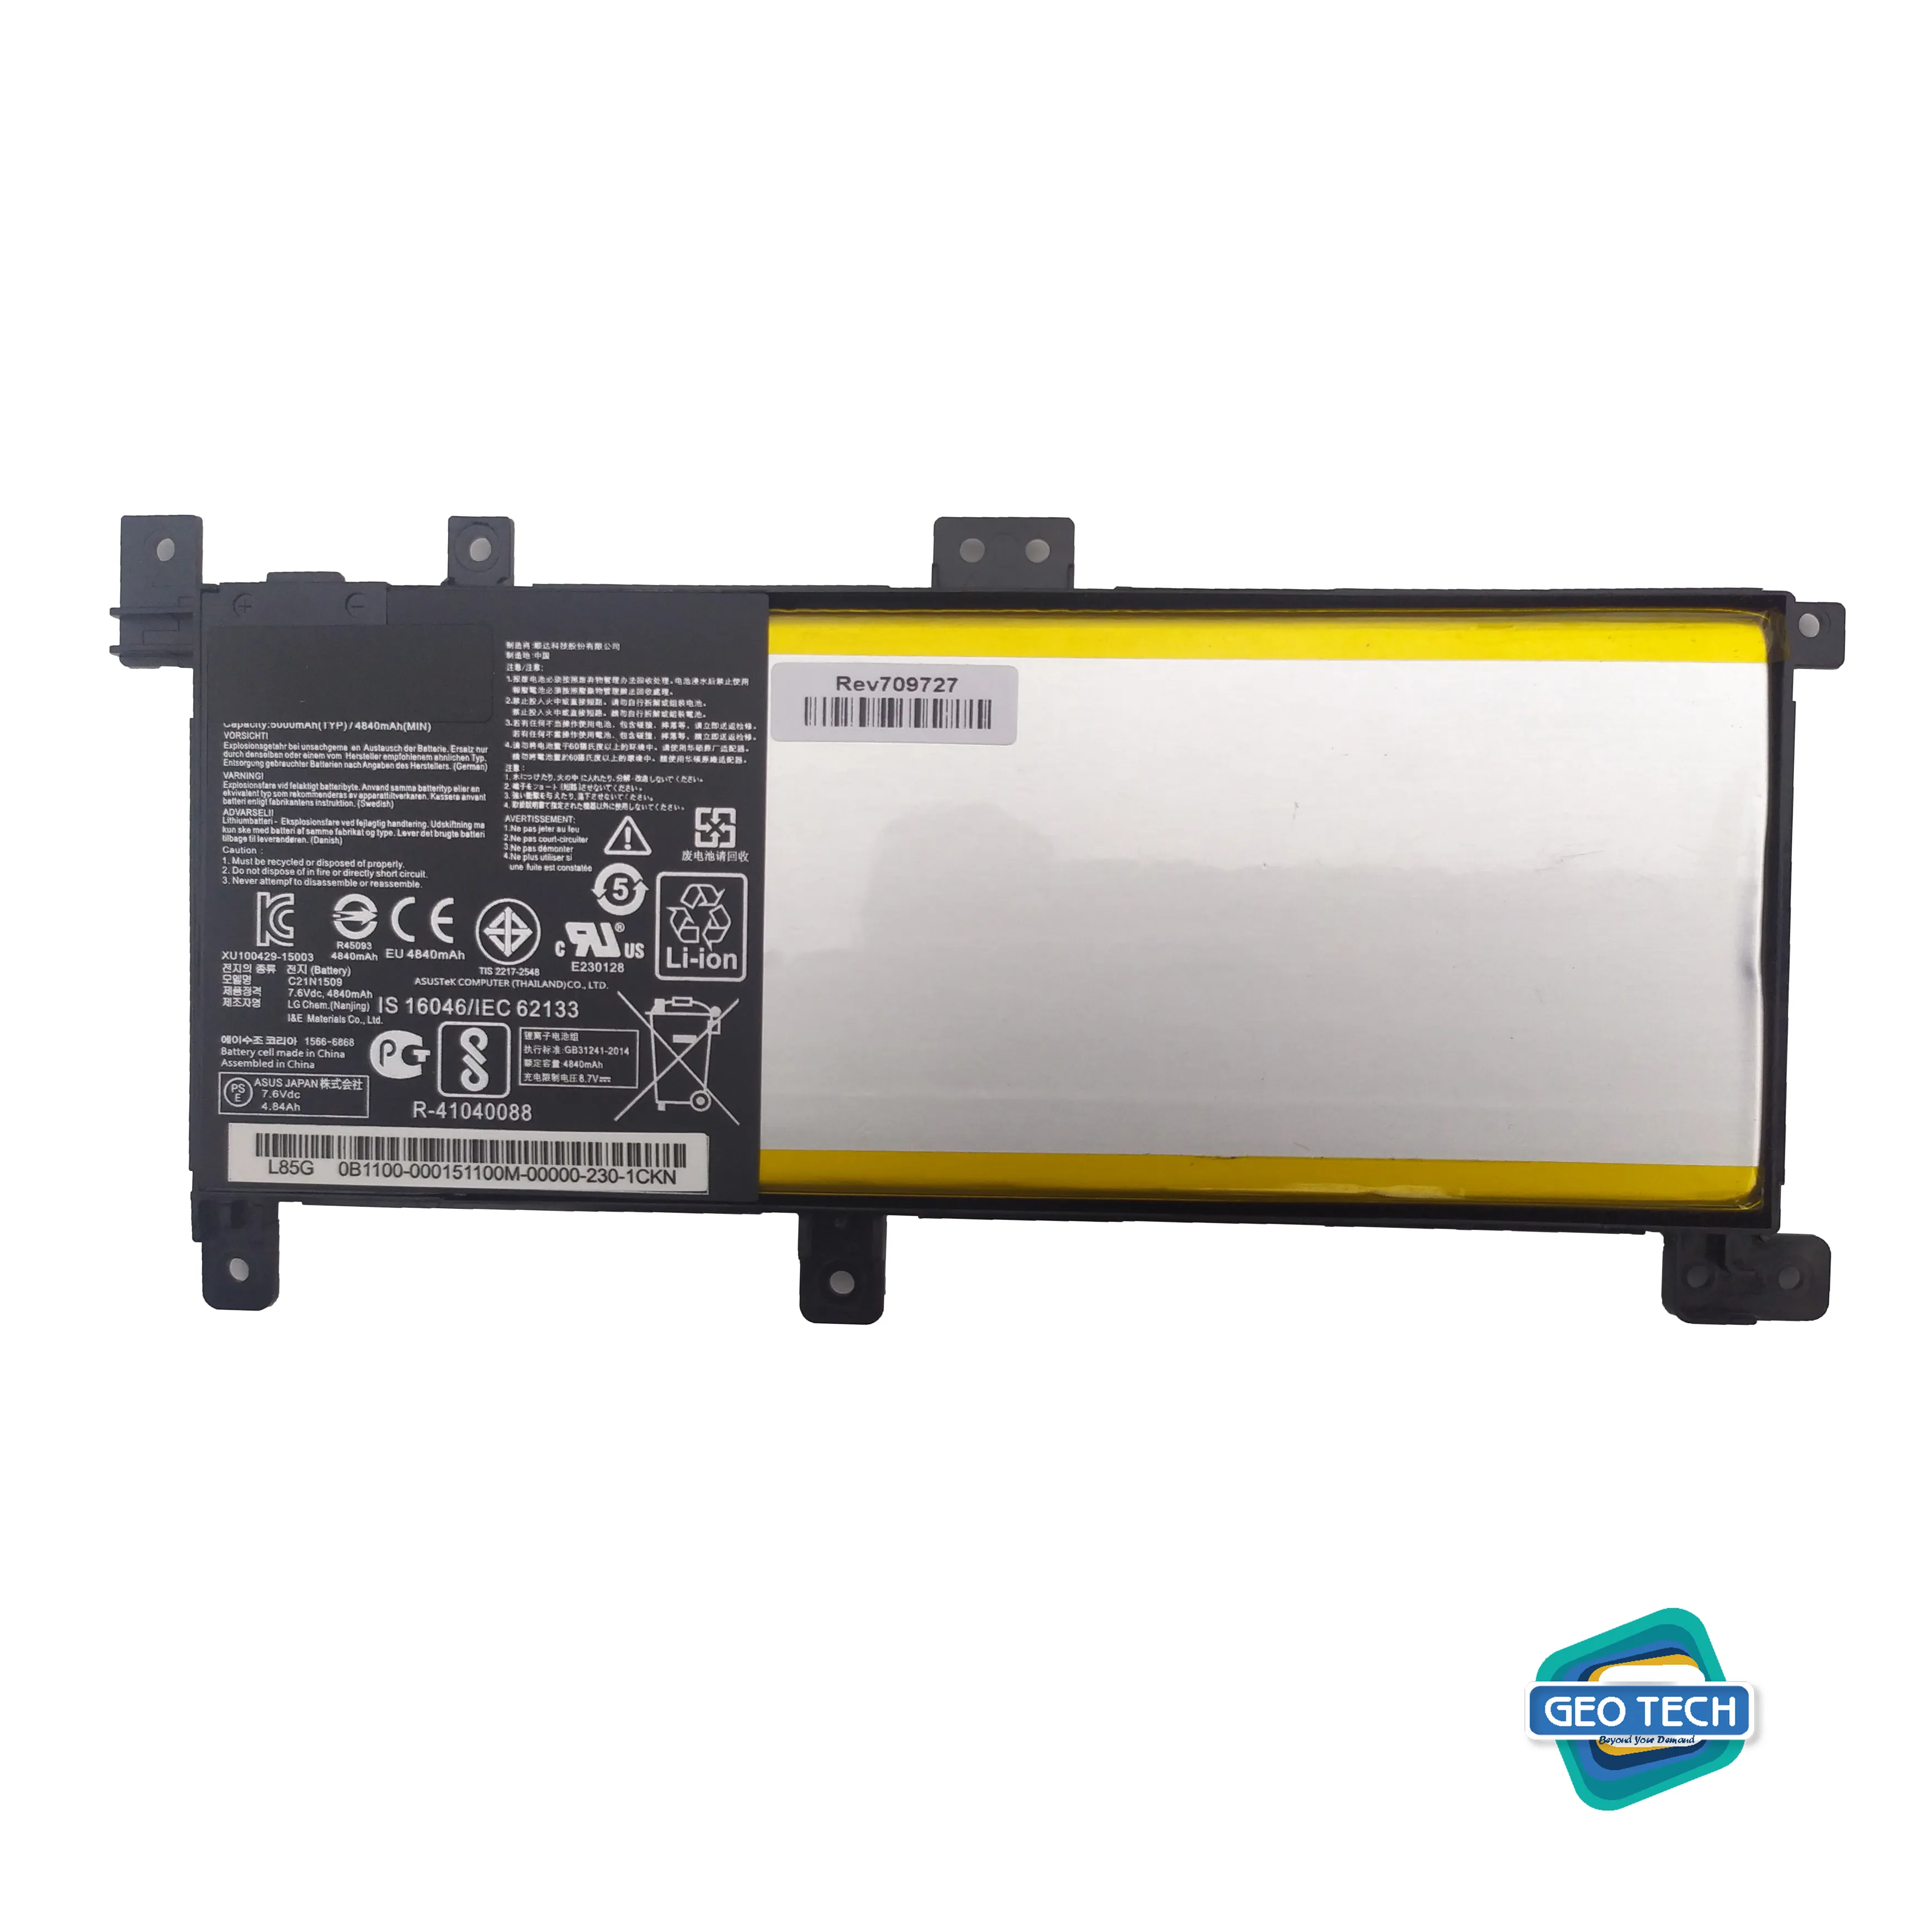 C21N1347 Laptop Battery Compatible with Asus X555 X555L X555LA X555LD F554L F555L X555LB X555LF X555LJ 7.6v 37wh